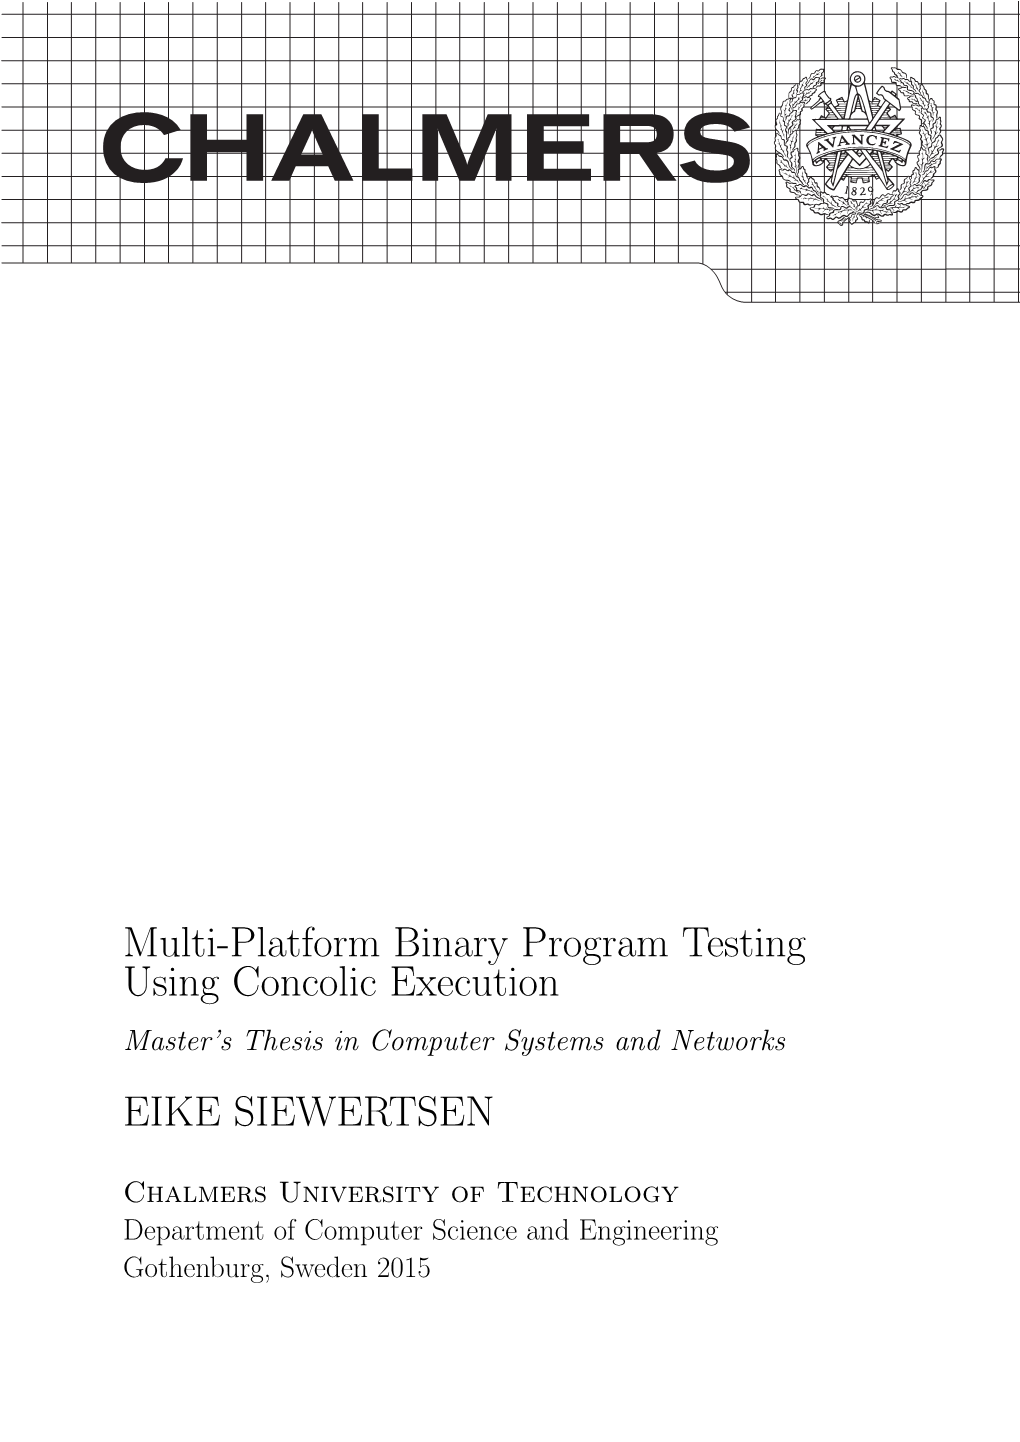 Multi-Platform Binary Program Testing Using Concolic Execution Master’S Thesis in Computer Systems and Networks